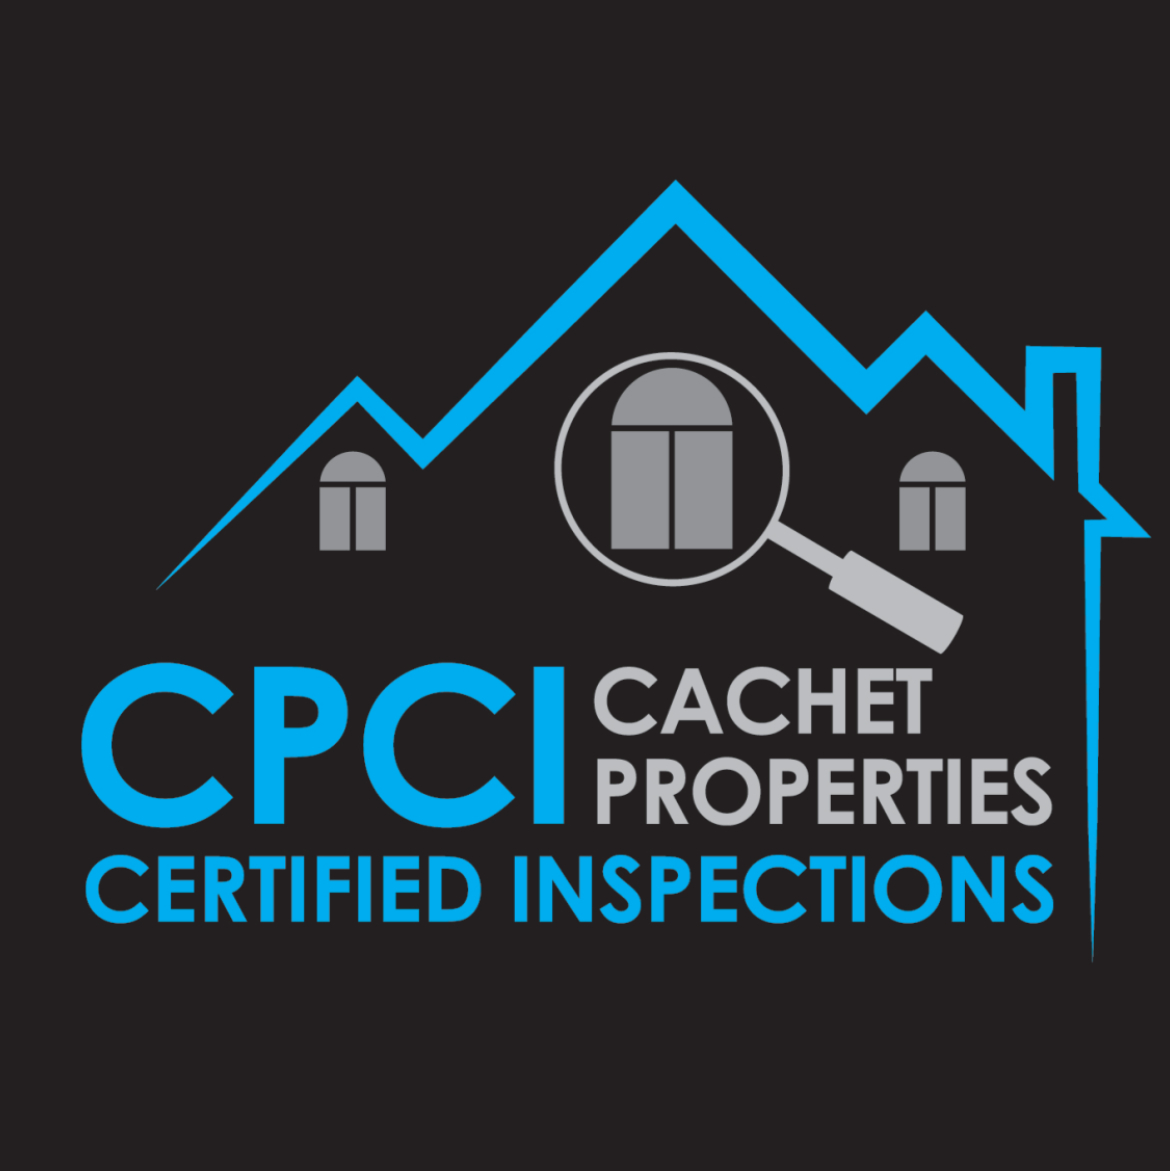 Cachet Properties Certified Inspections - Conseillers immobiliers